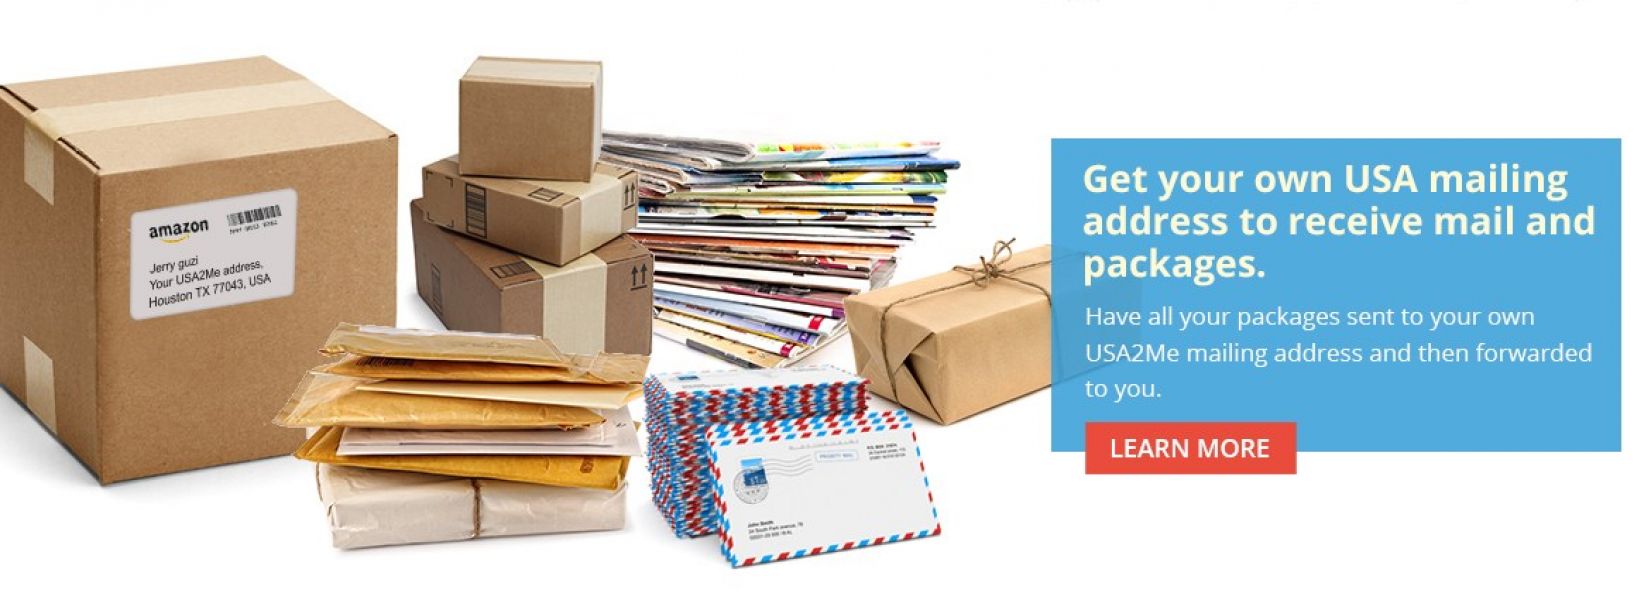 US Mail Service and Package Forwarding Services | USA2ME